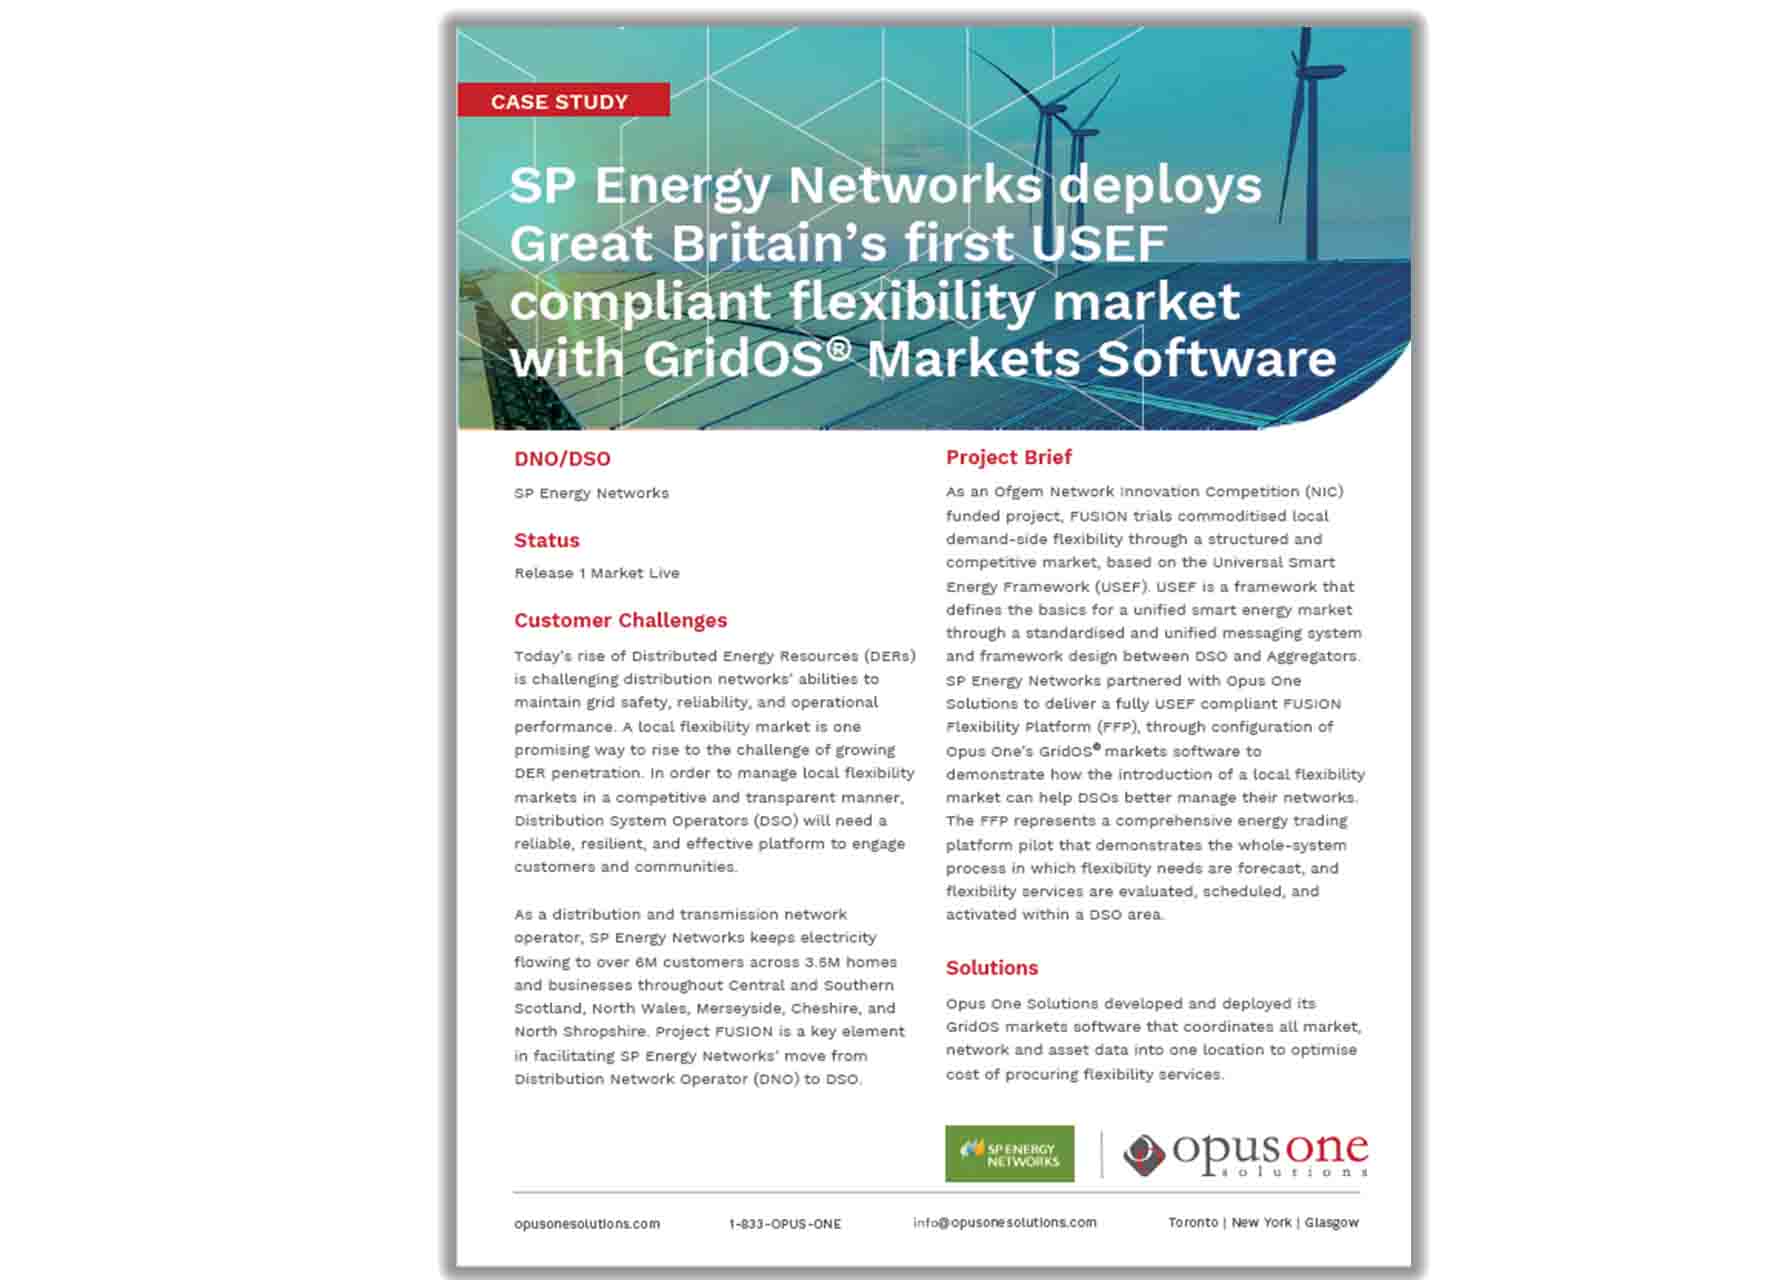 SP Energy Networks deploys Great Britain’s first USEF compliant flexibility market with GridOS® Markets Software